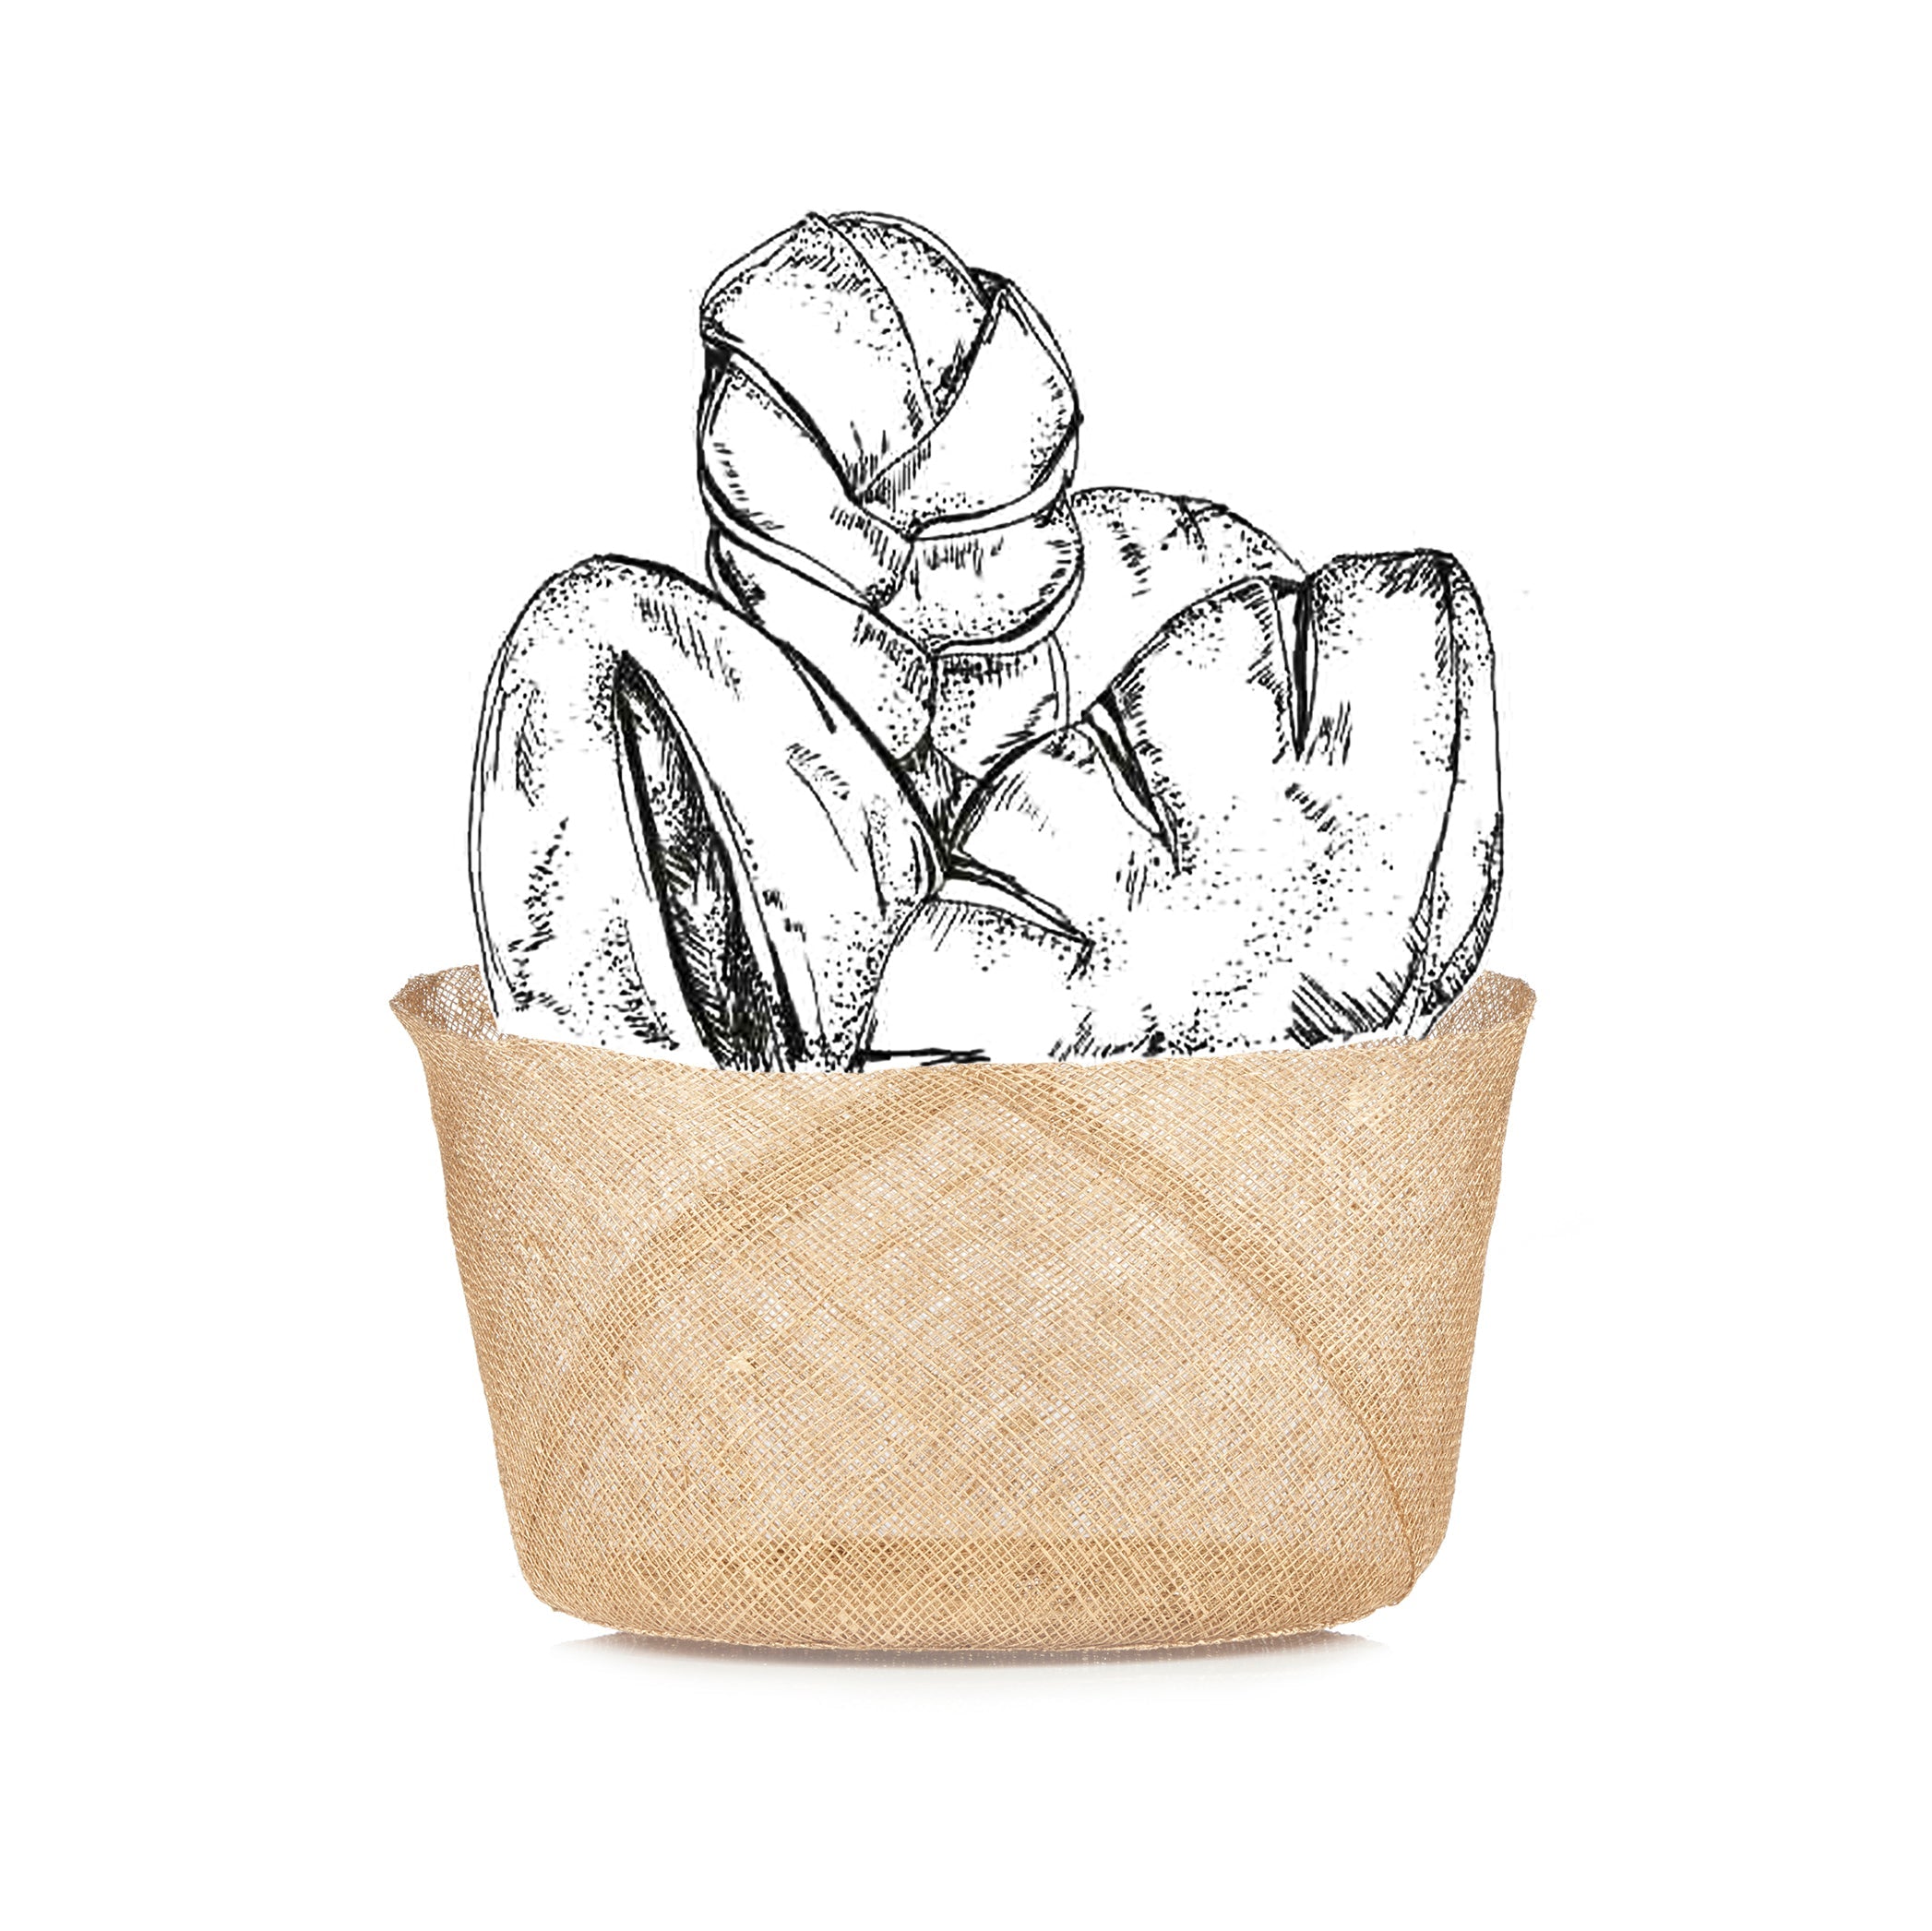 Abaca Round Bread Basket in Gold